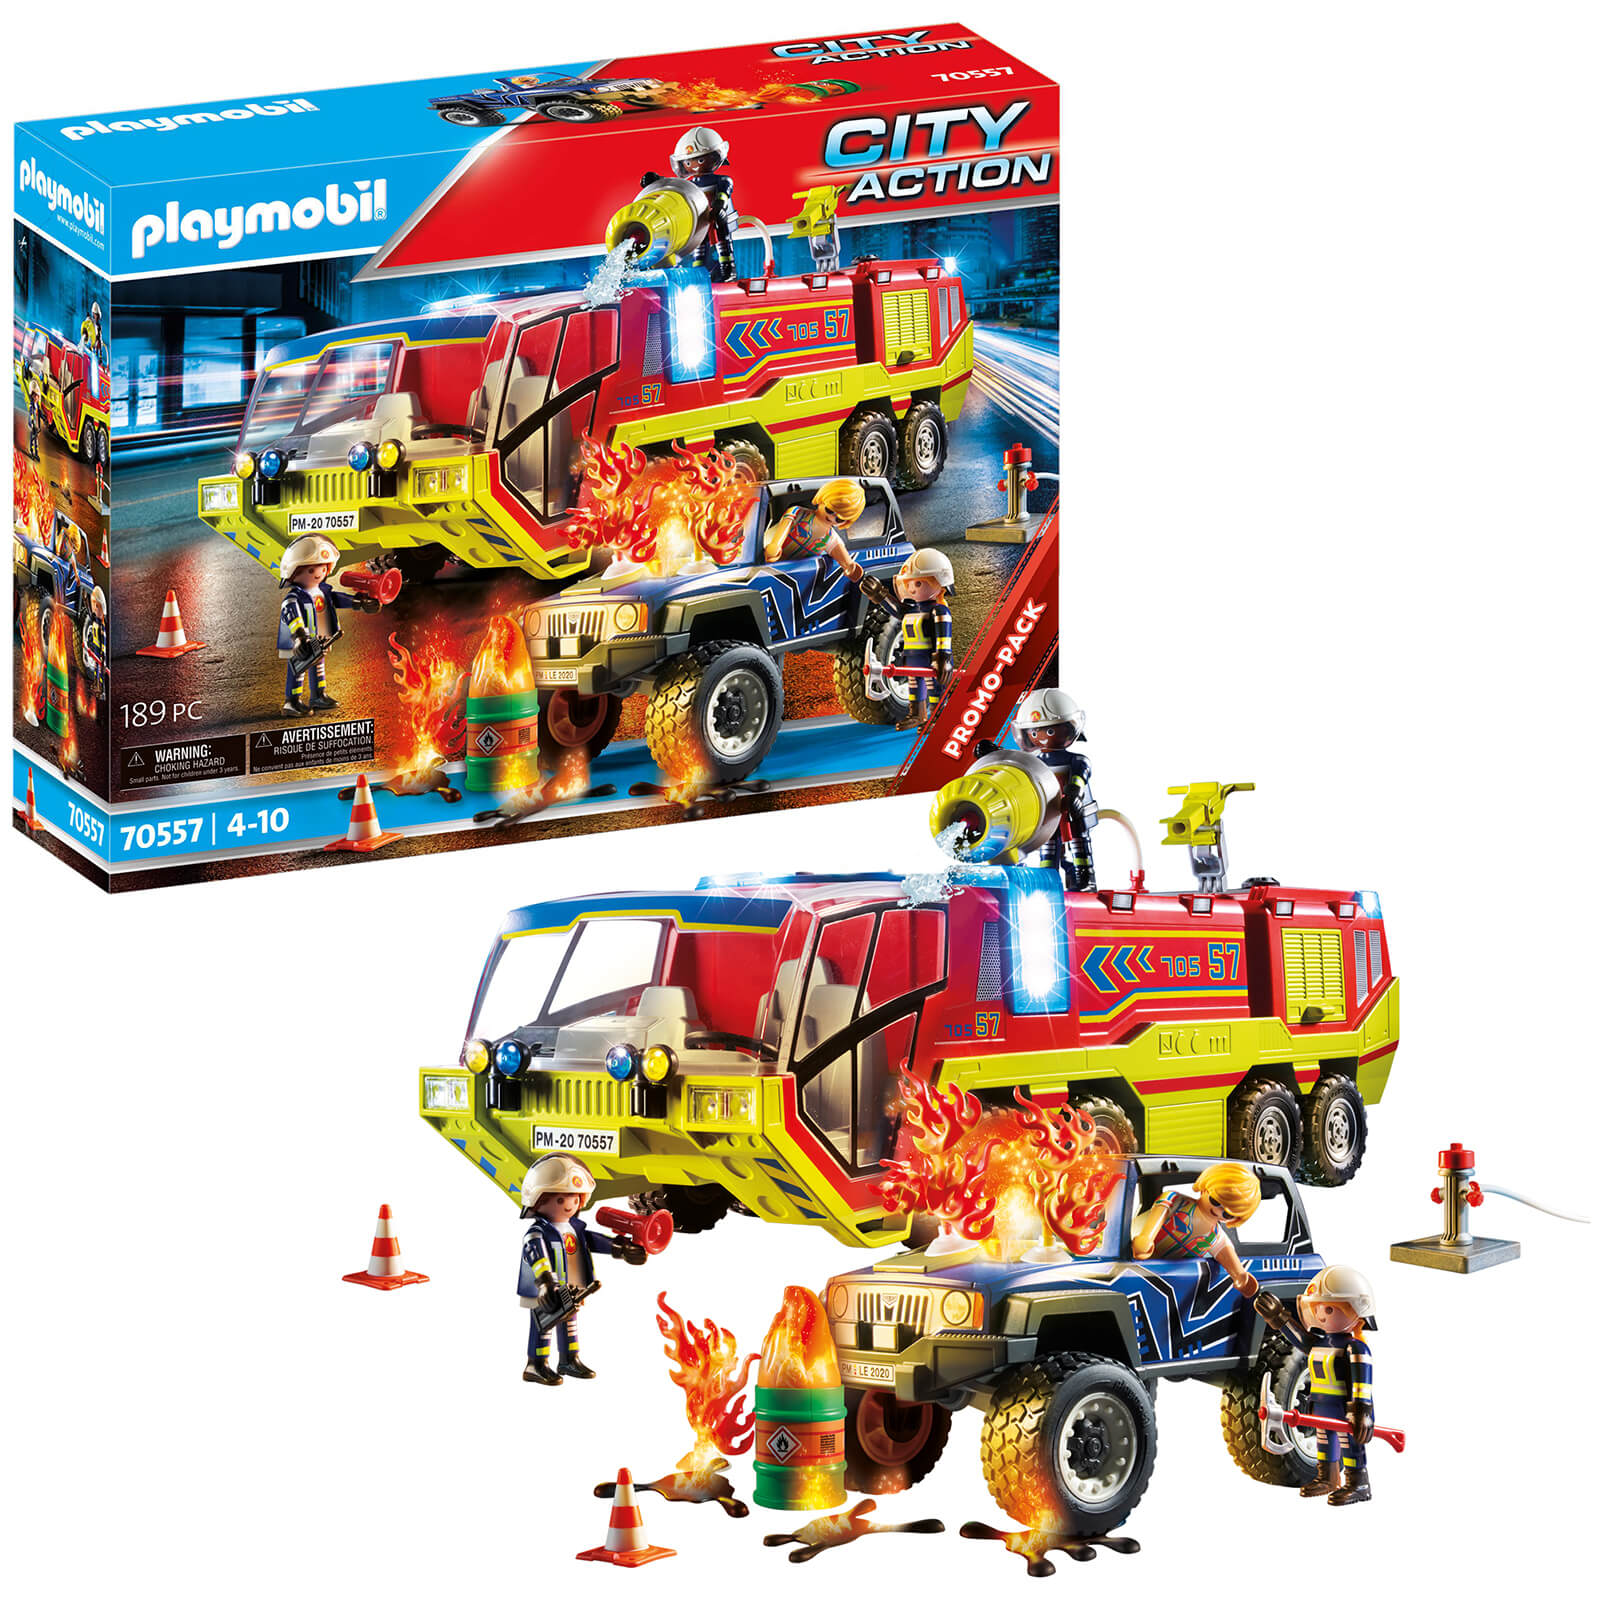 Playmobil City Action Promo Fire Engine with Truck (70557)